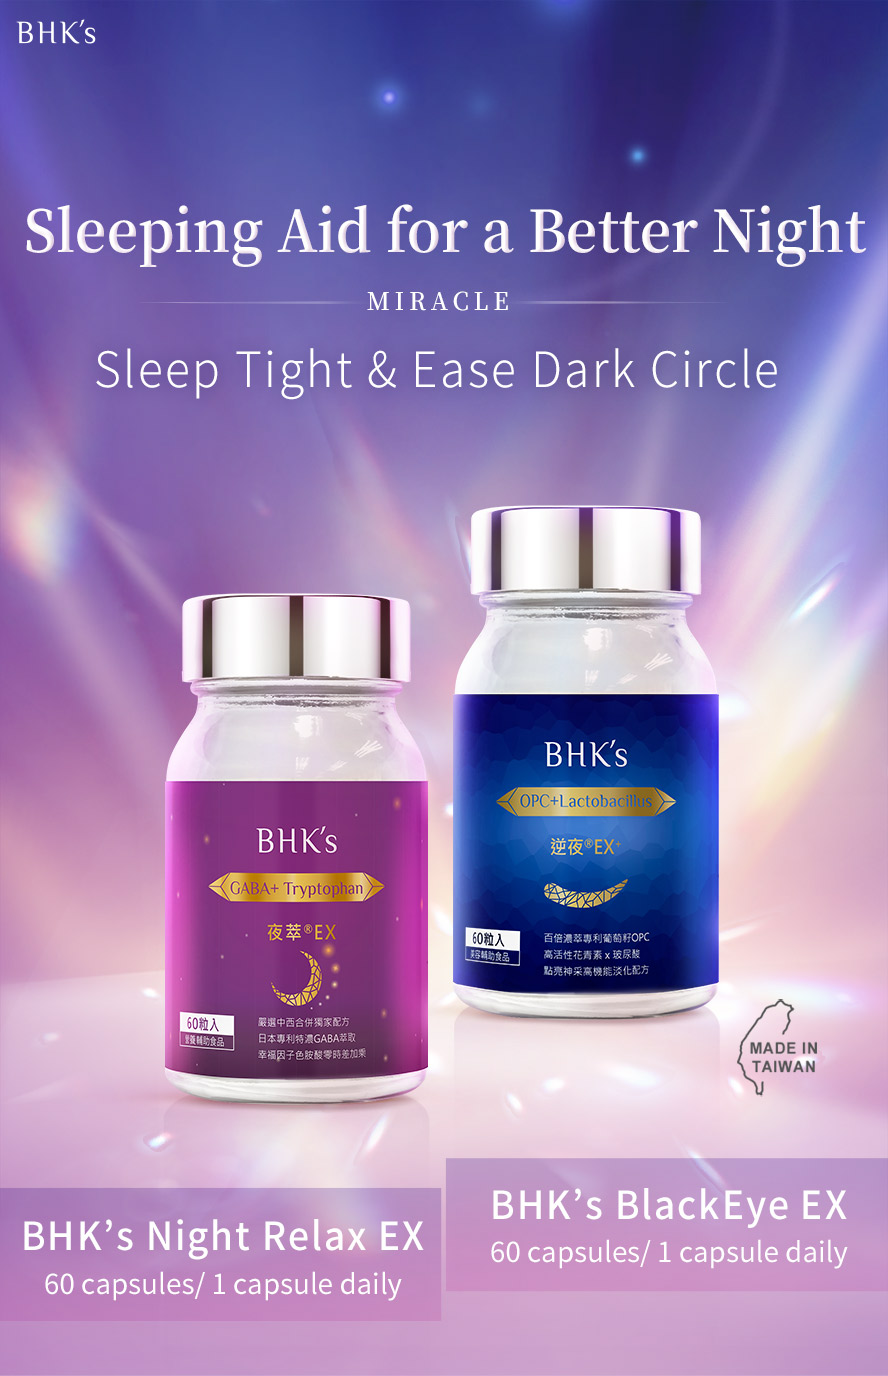 BHK's Night Relax EX and BlackEye EX+ promote better sleeping and help get rid of dark circles.